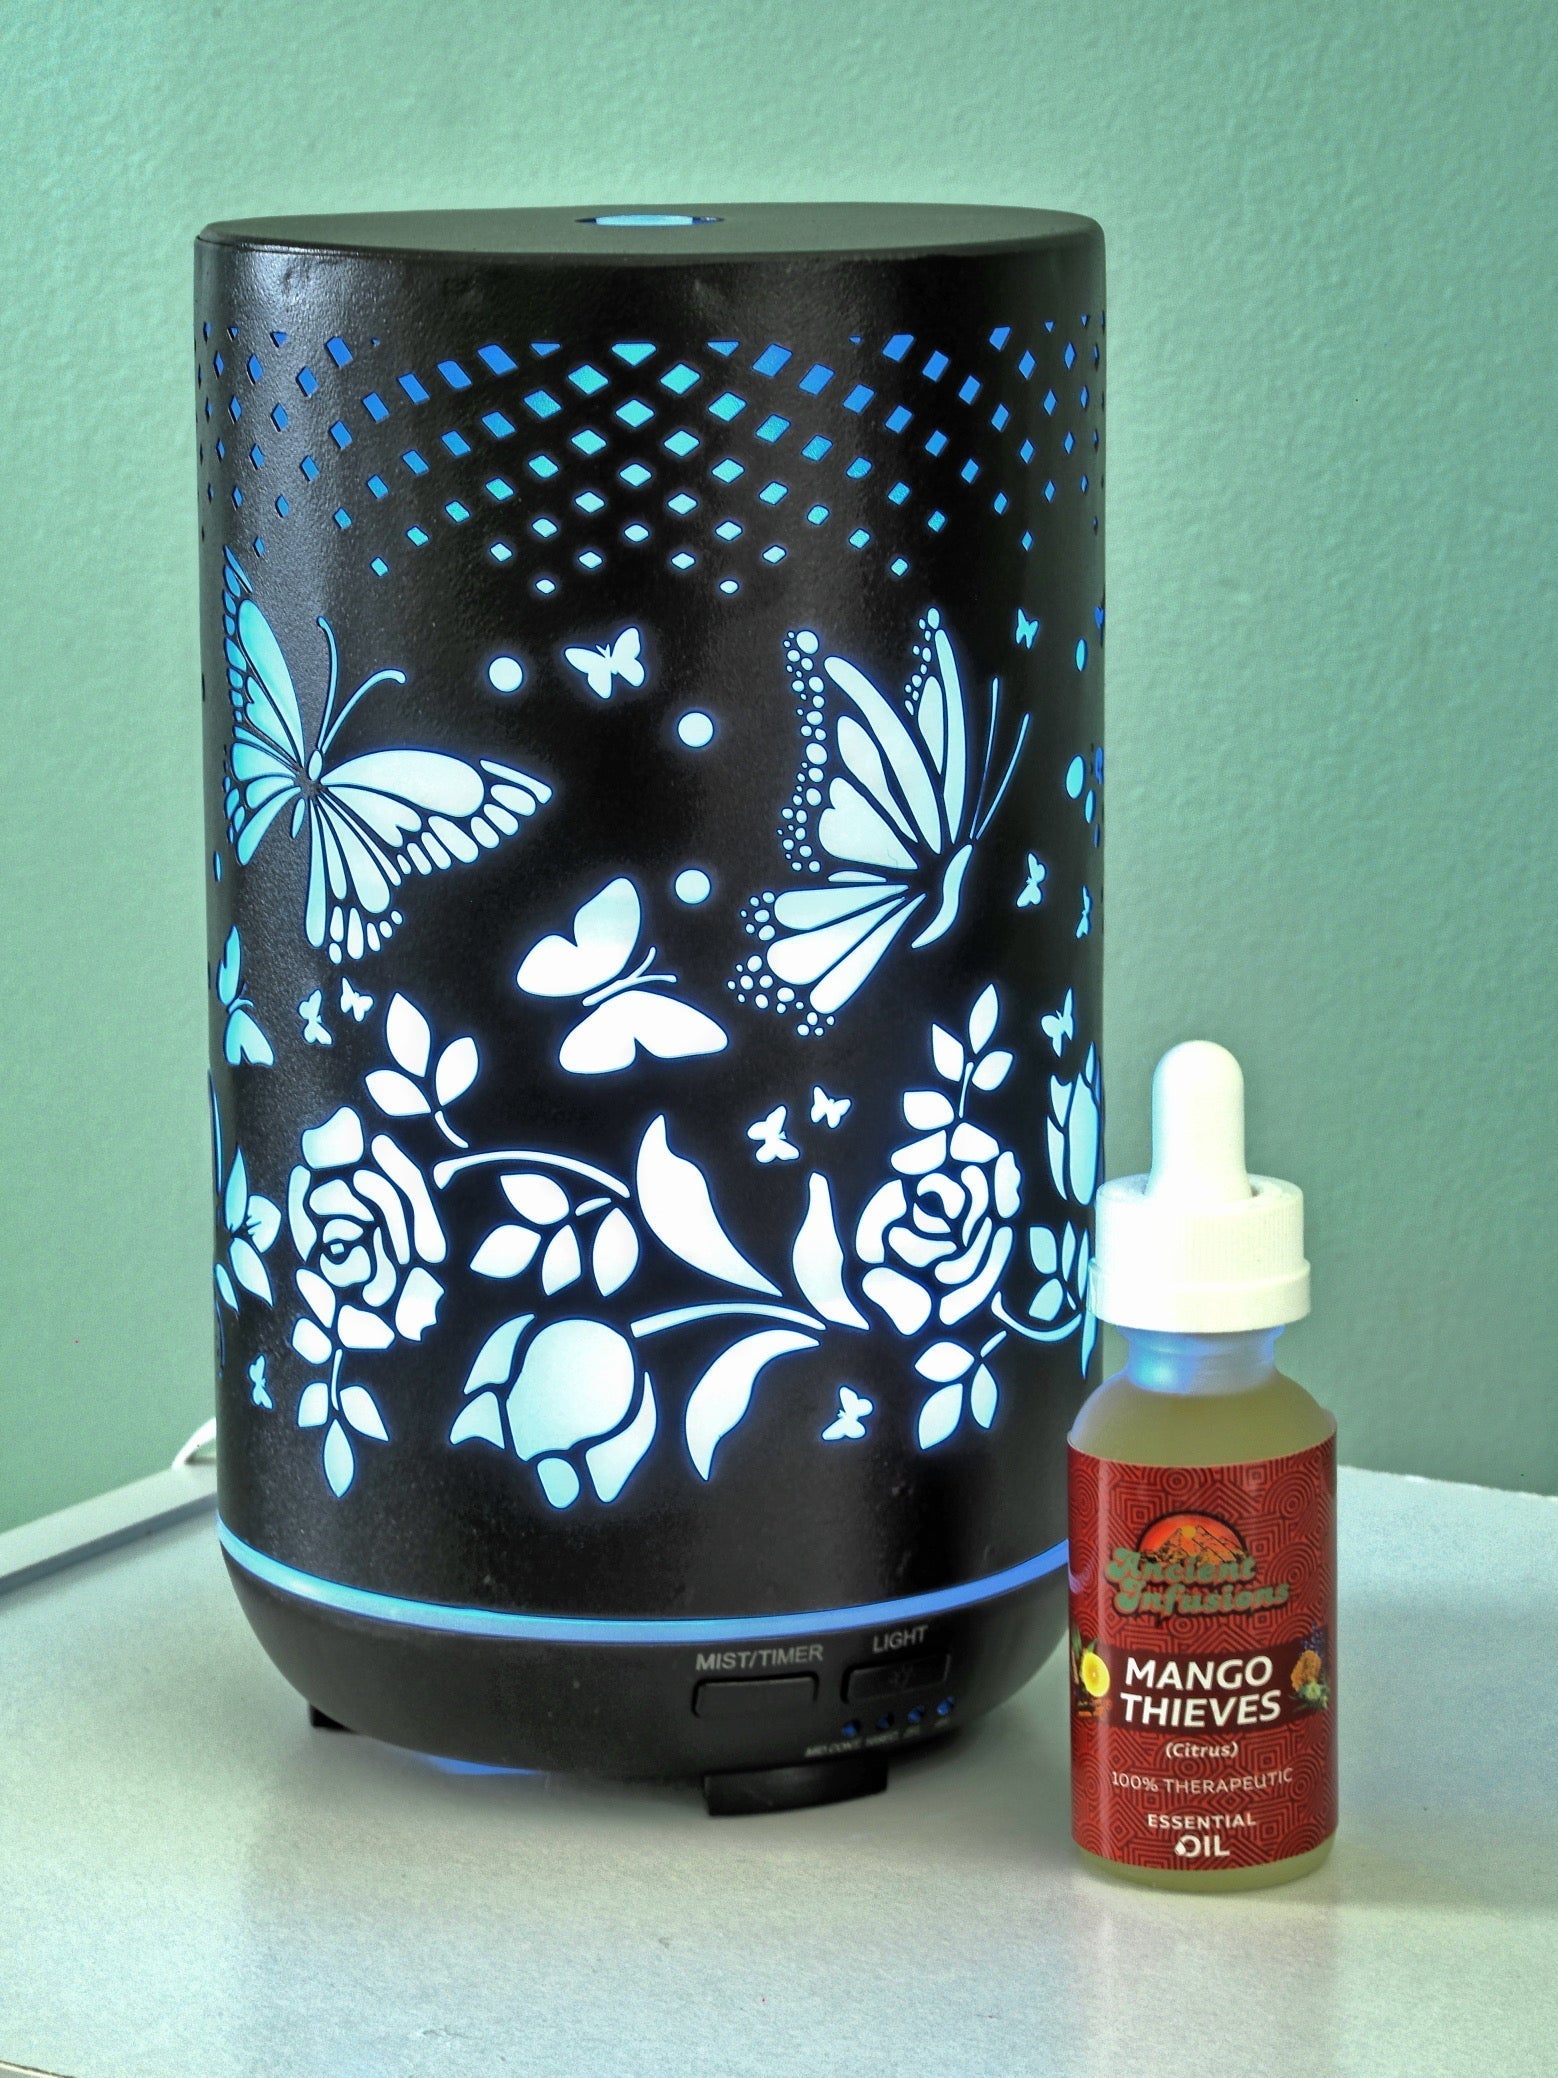 Beautiful Aromatherapy Diffuser with Butterflies and Roses Design by Ancient Infusions.